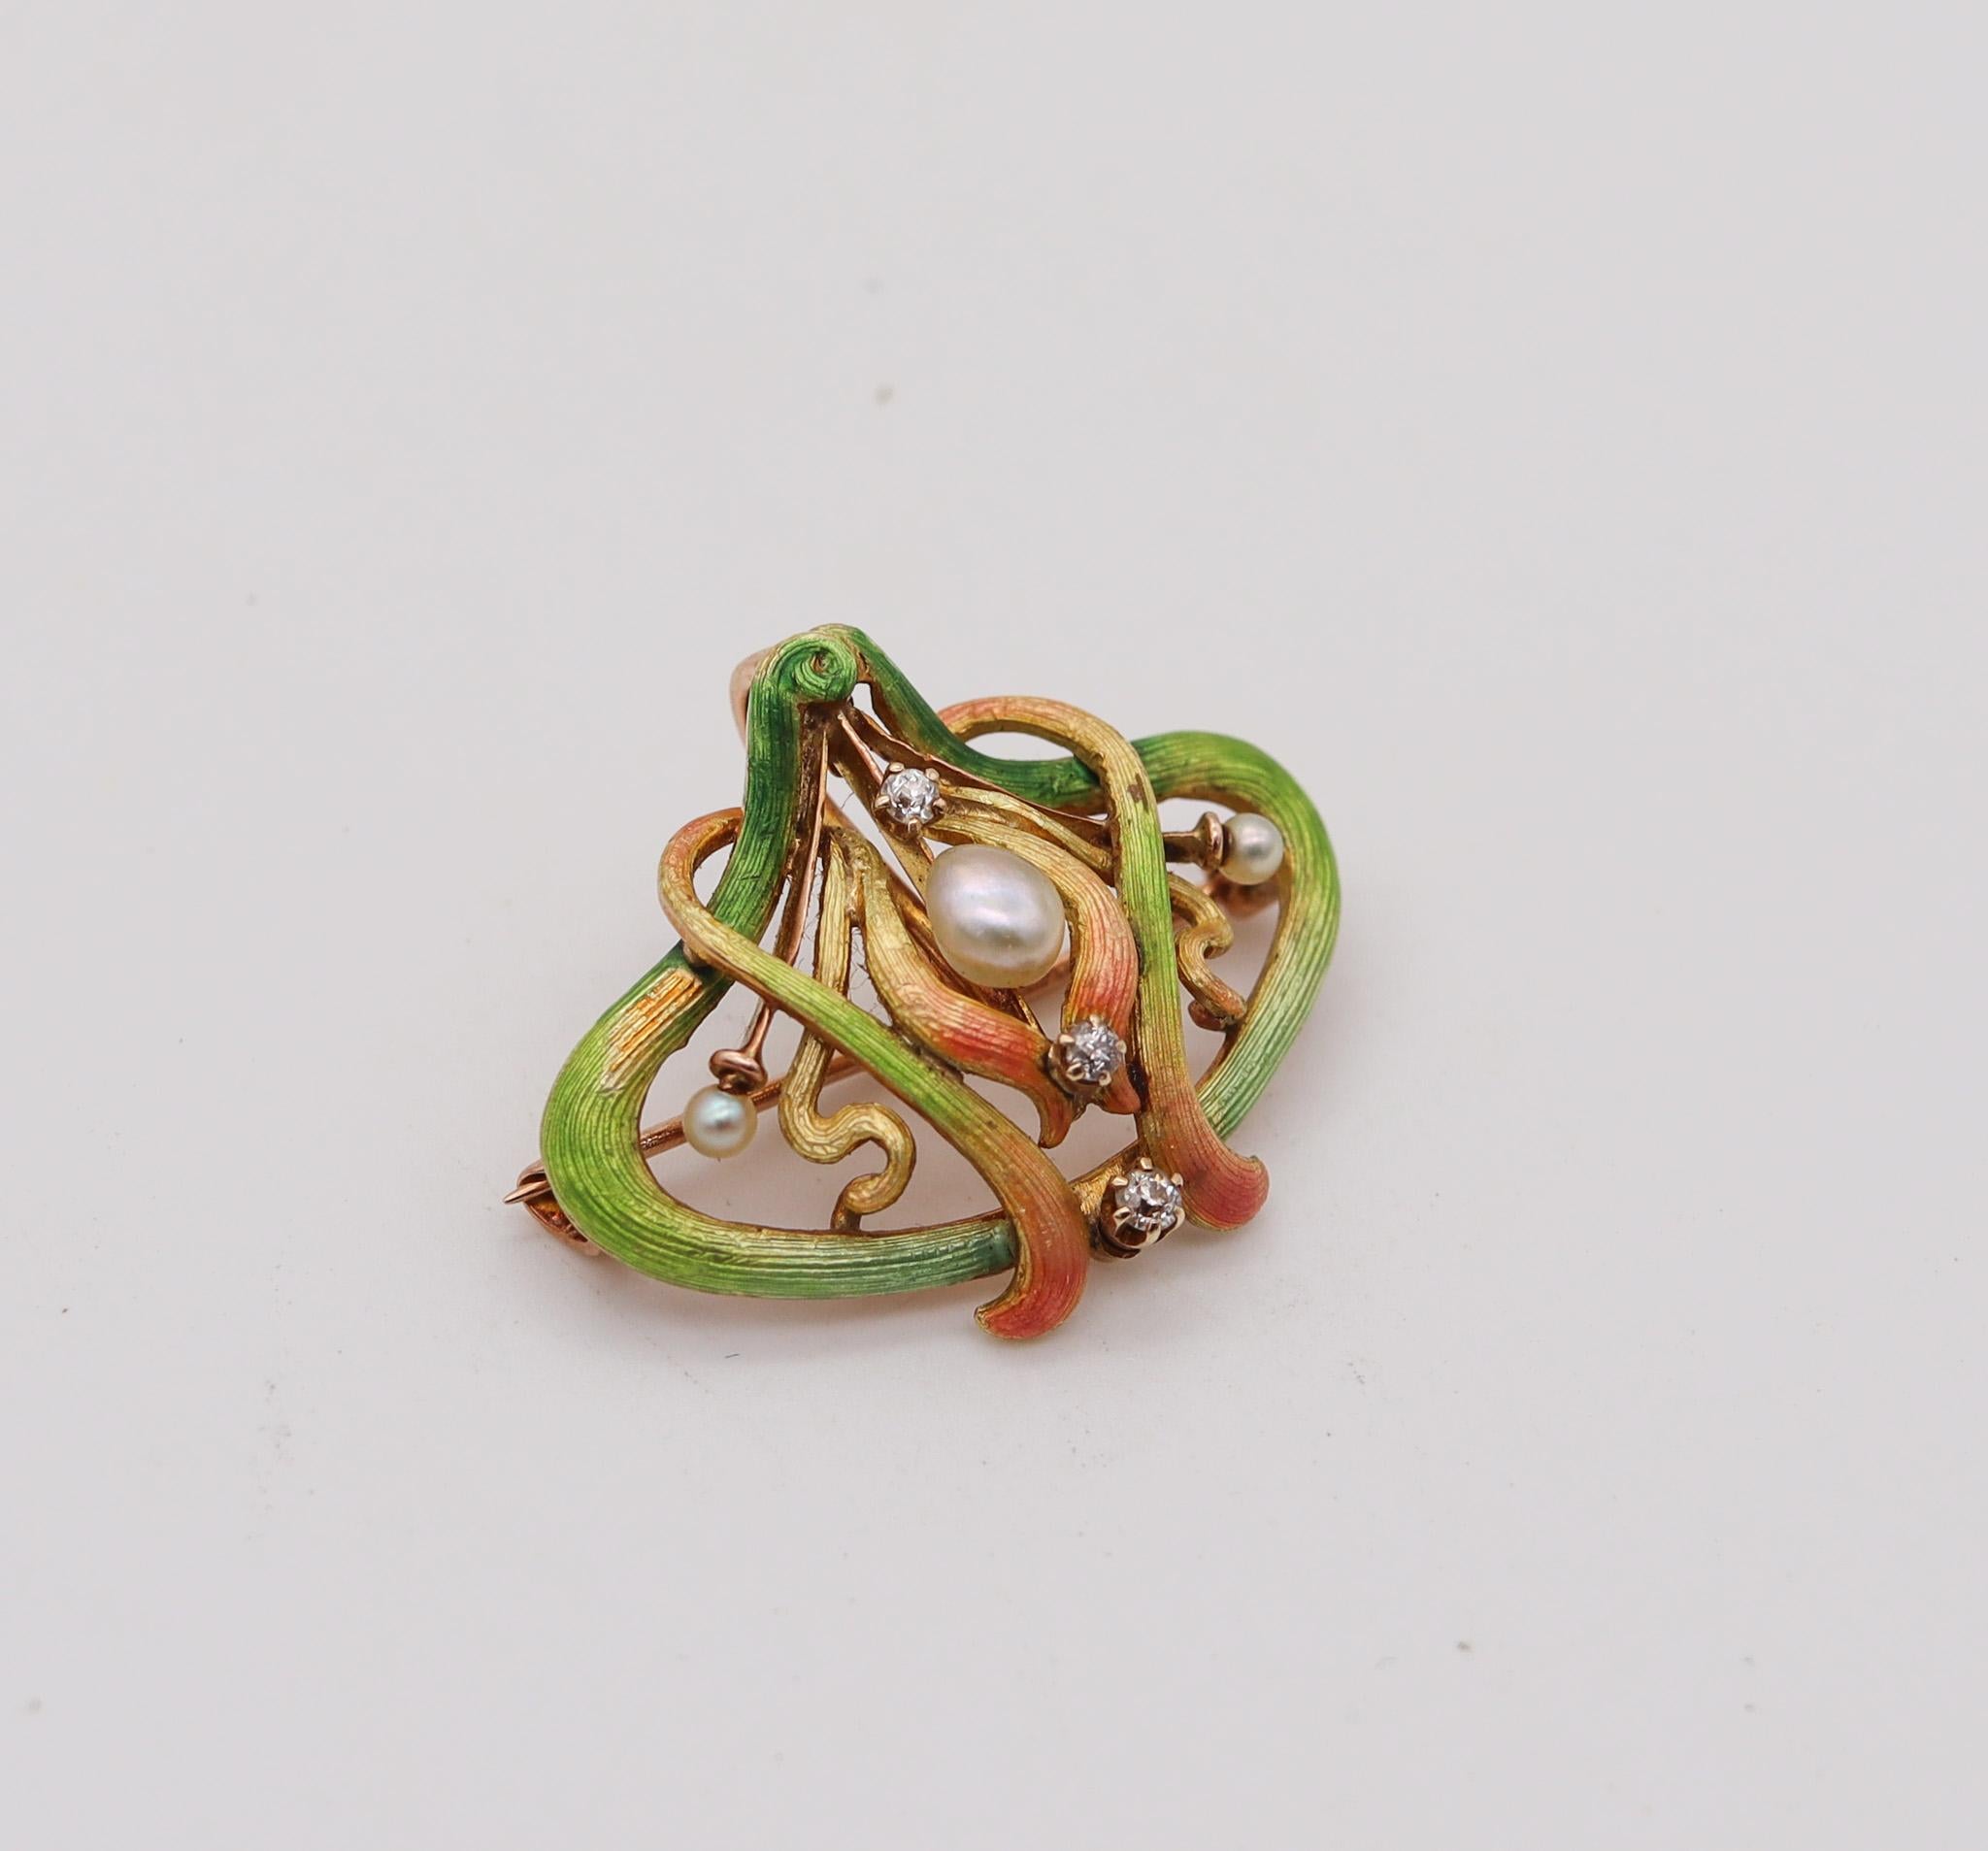 Women's American 1890 Art Nouveau Enamel Brooch In 14Kt Gold With Diamonds And Pearls For Sale